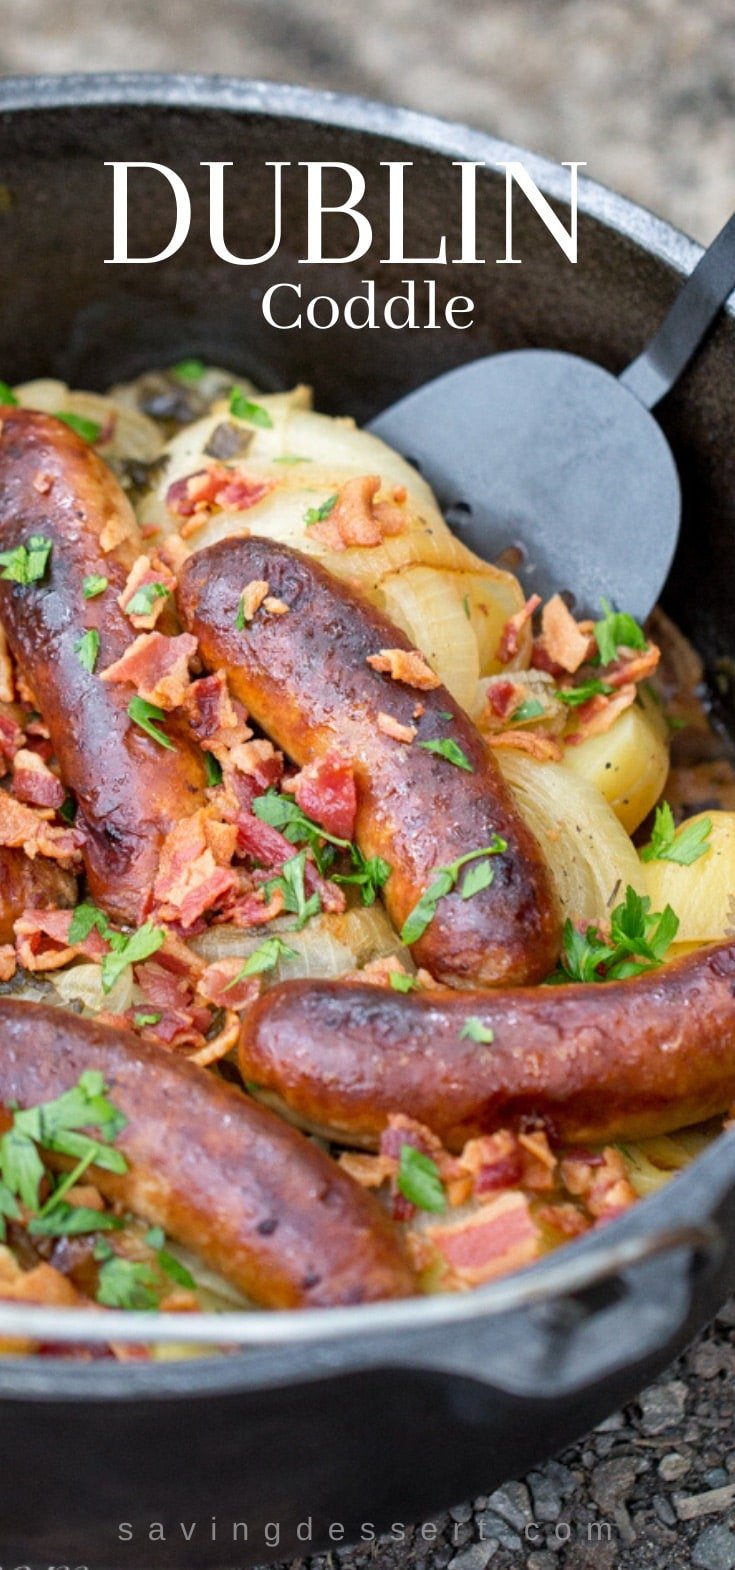 An outdoor Dutch Oven filled with Dublin Coddle, a layered casserole with potatoes, onions, bacon and sausage